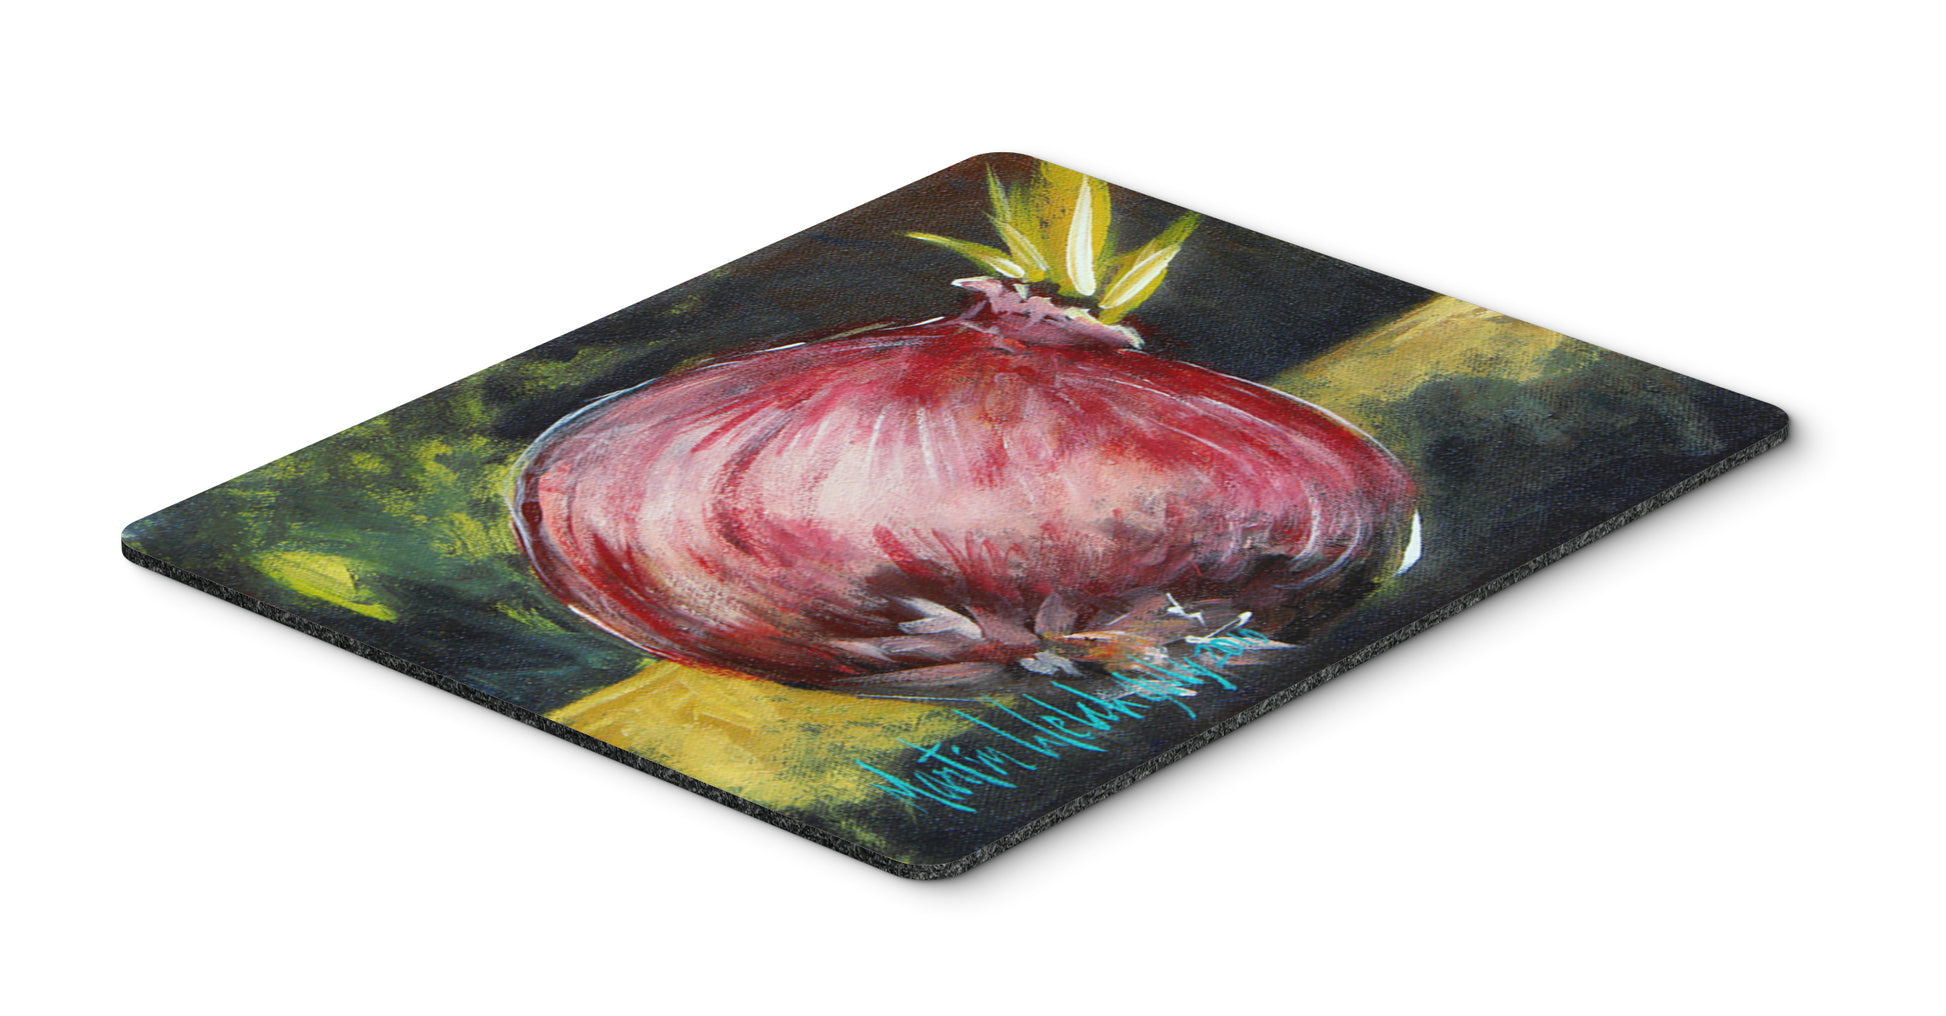 Buy this Vegetables - Onion One-Yun Mouse Pad, Hot Pad or Trivet